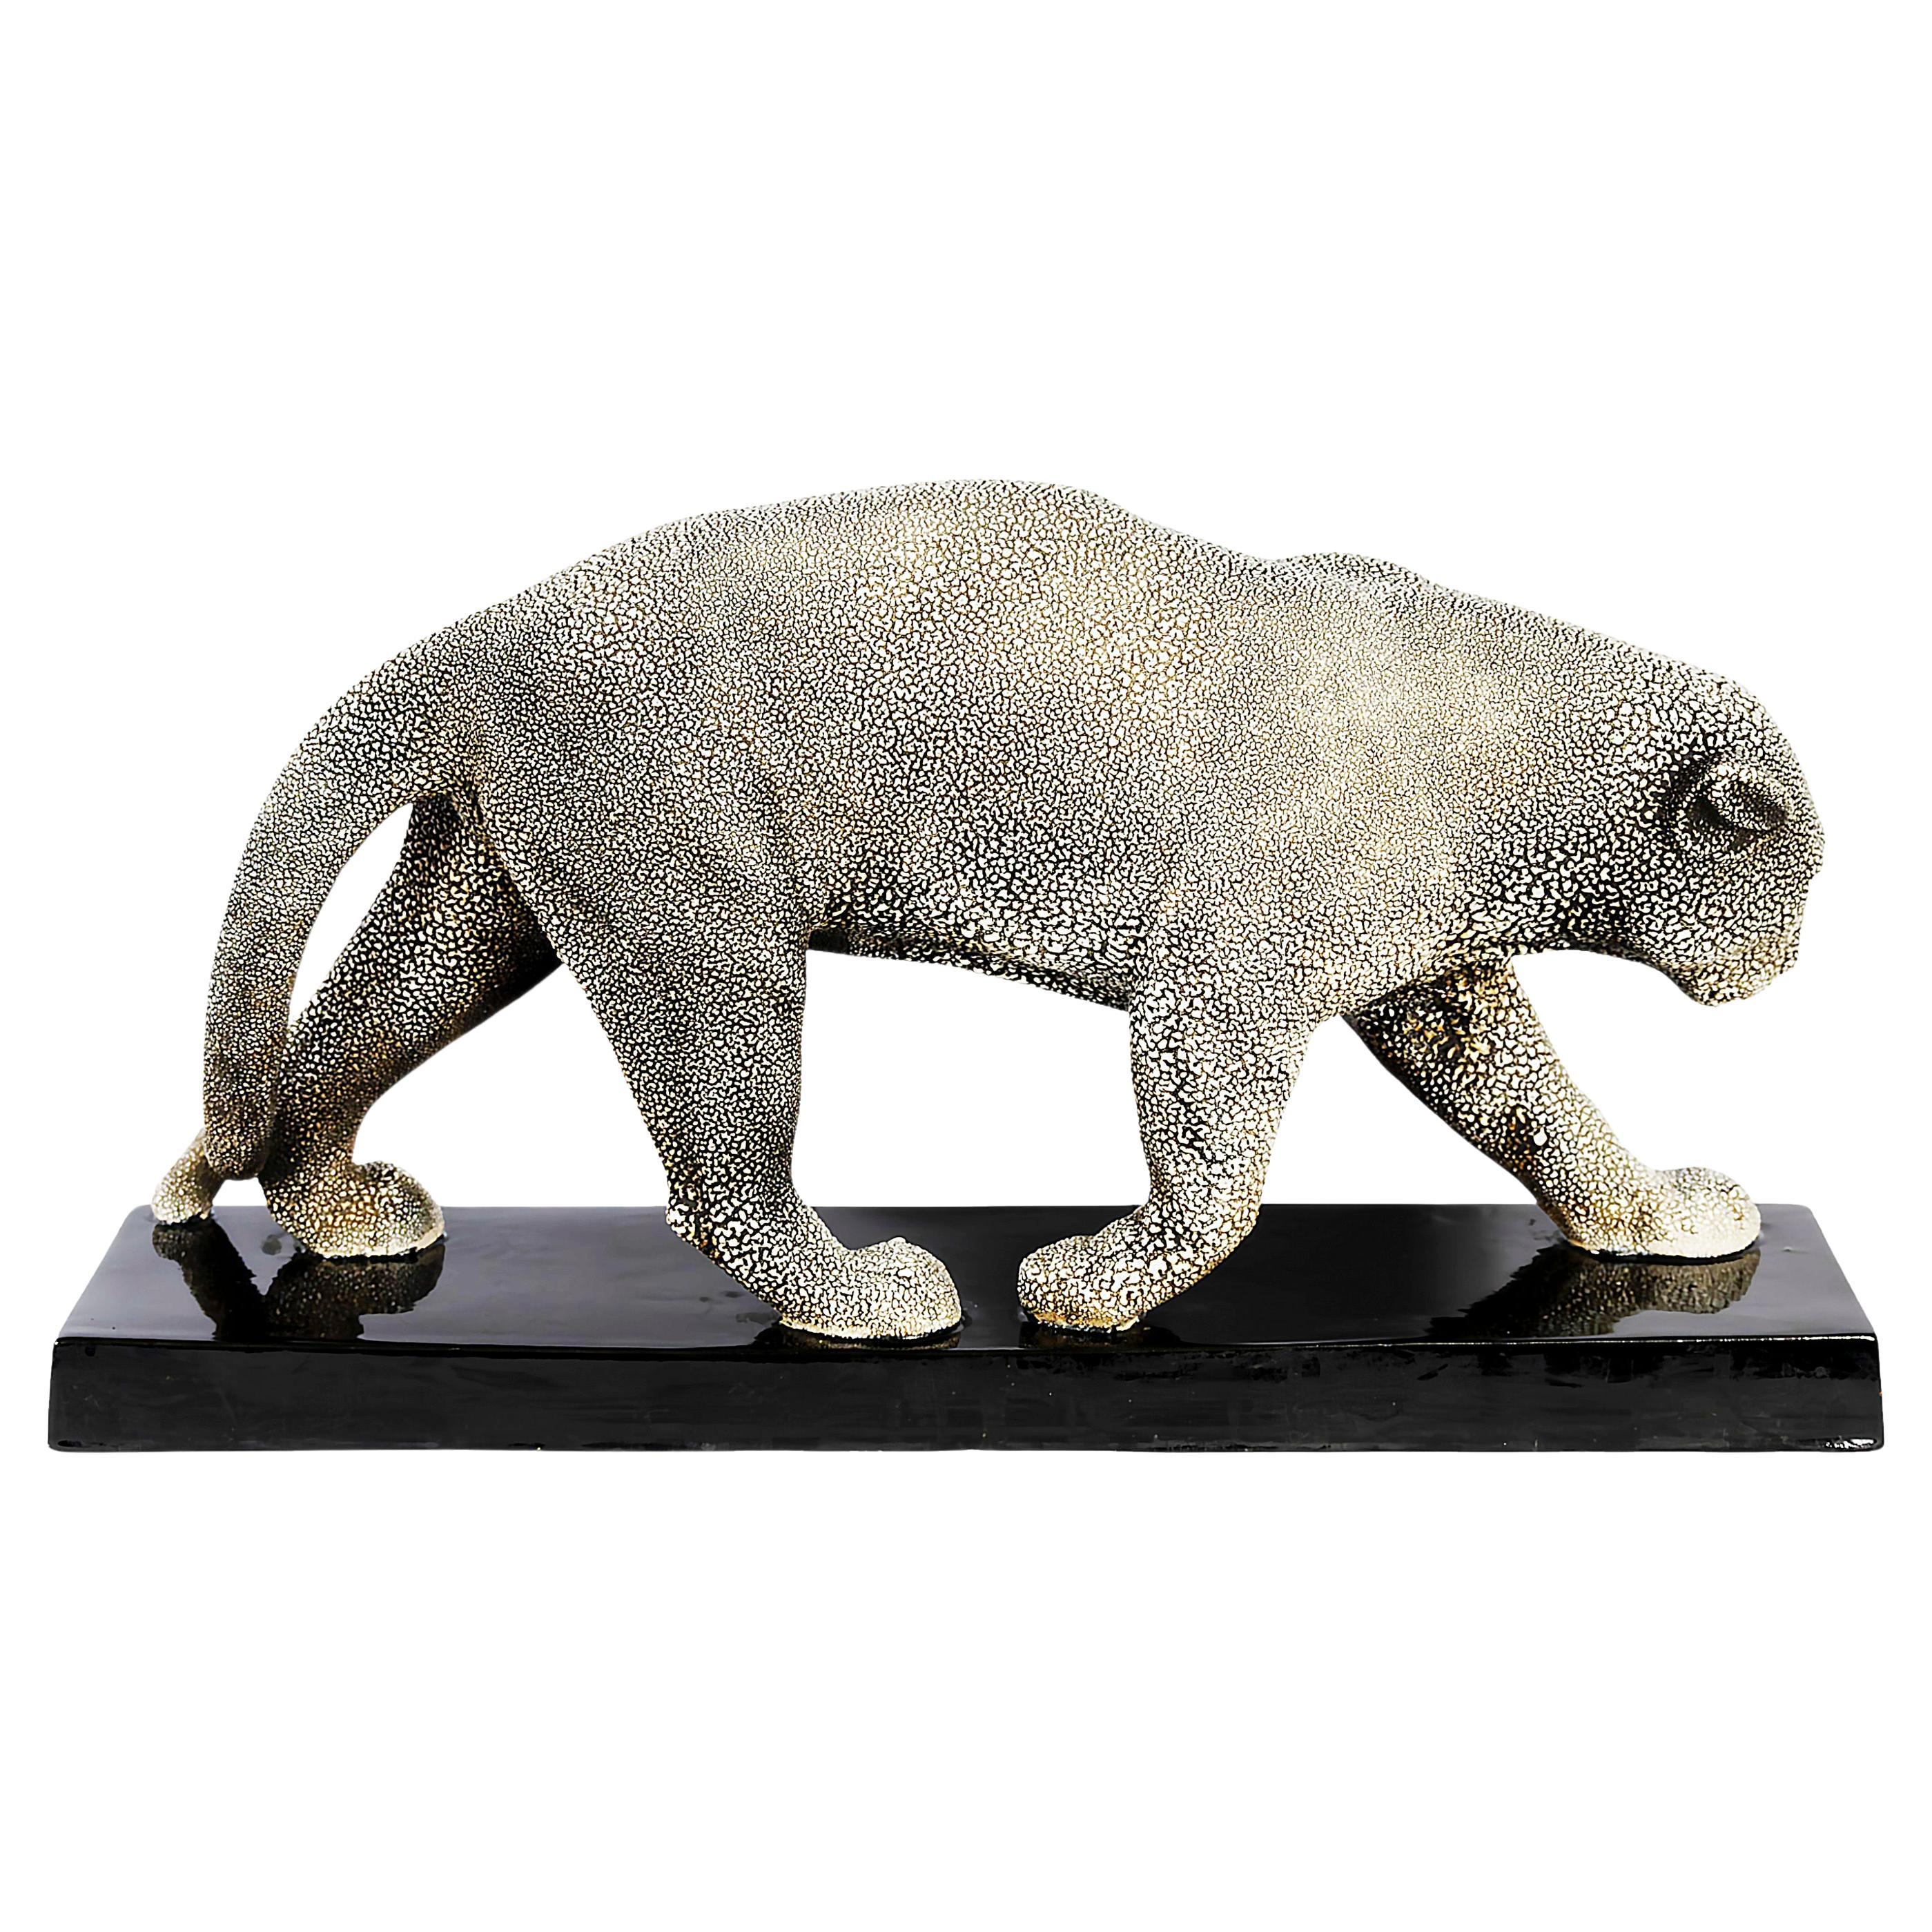 Hand-Crafted French Art Deco Ceramic Panther Sculpture by G.Beauvais for Edition Kaza, 1930's For Sale